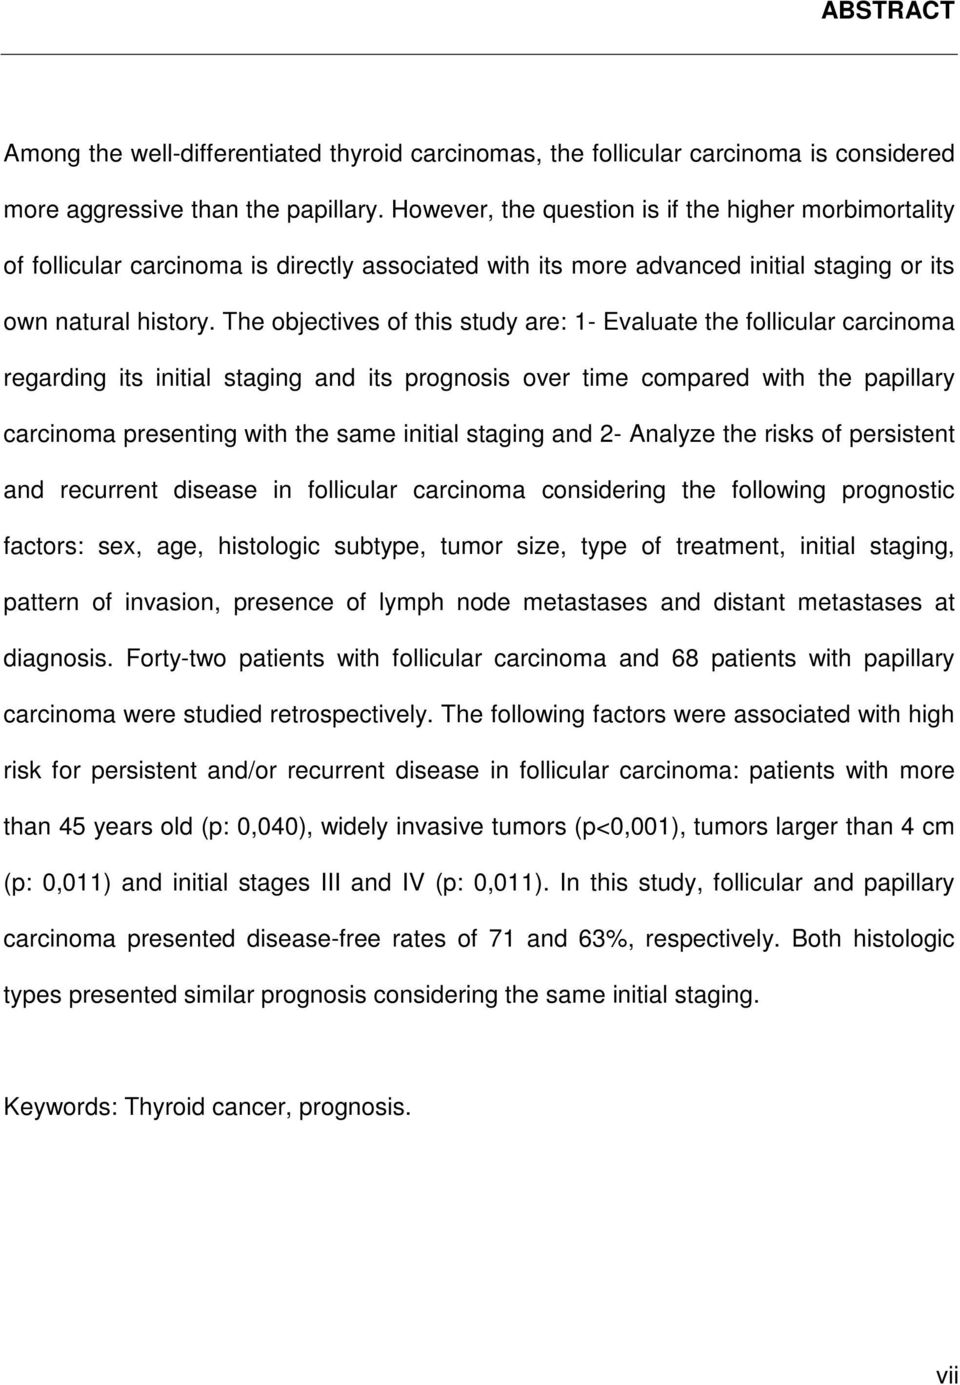 The objectives of this study are: 1- Evaluate the follicular carcinoma regarding its initial staging and its prognosis over time compared with the papillary carcinoma presenting with the same initial